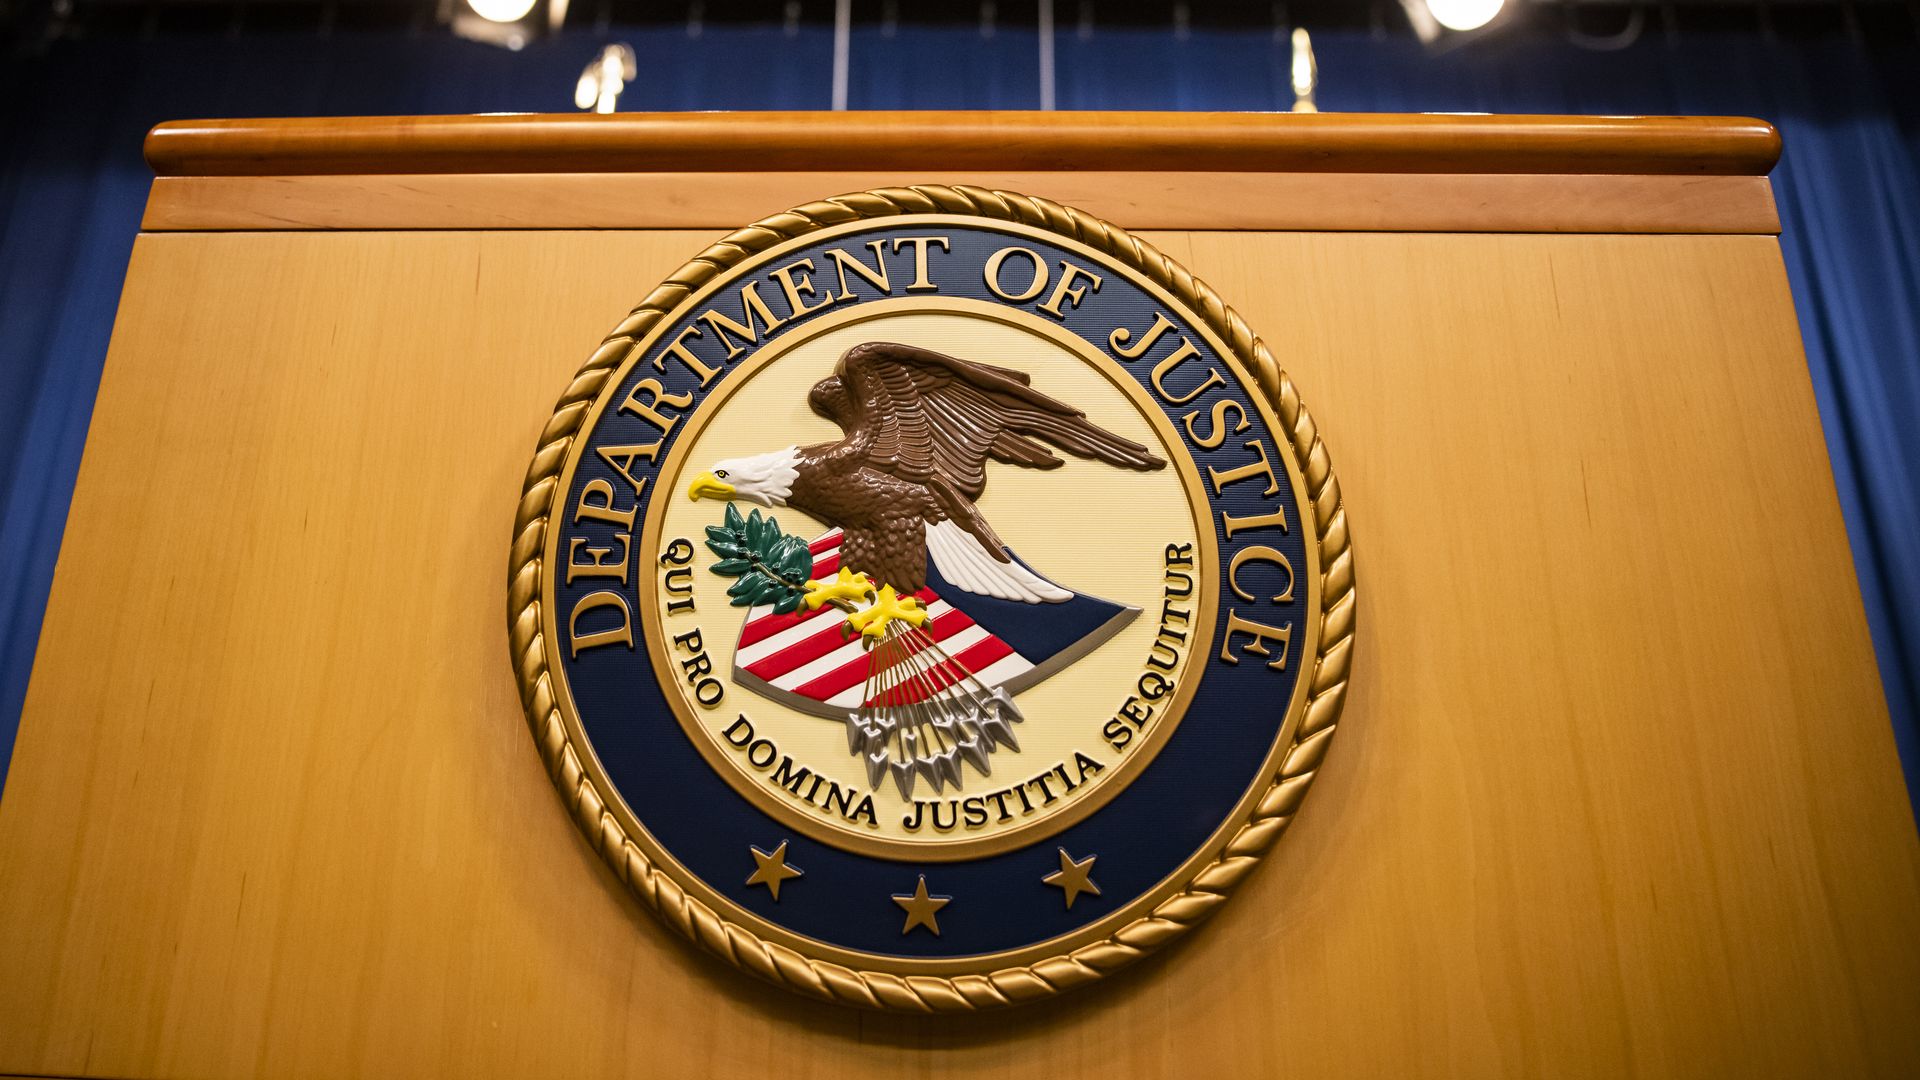 The Department of Justice's seal on a podium.